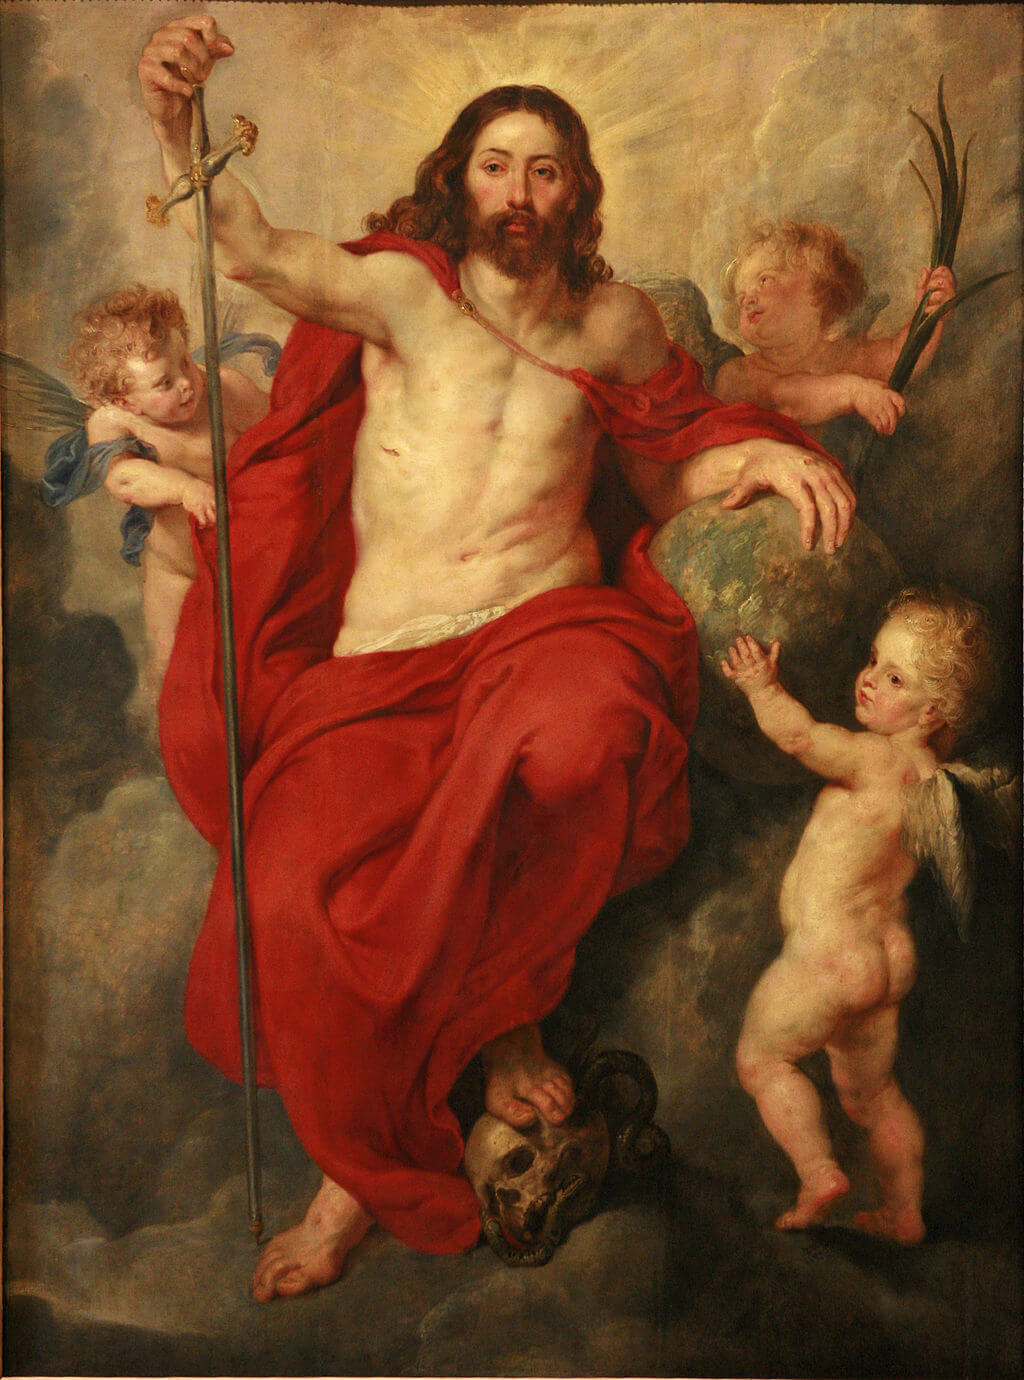 Christ Triumphant over Sin and Dead by Peter Paul Rubens in the Musée des Beaux-Arts